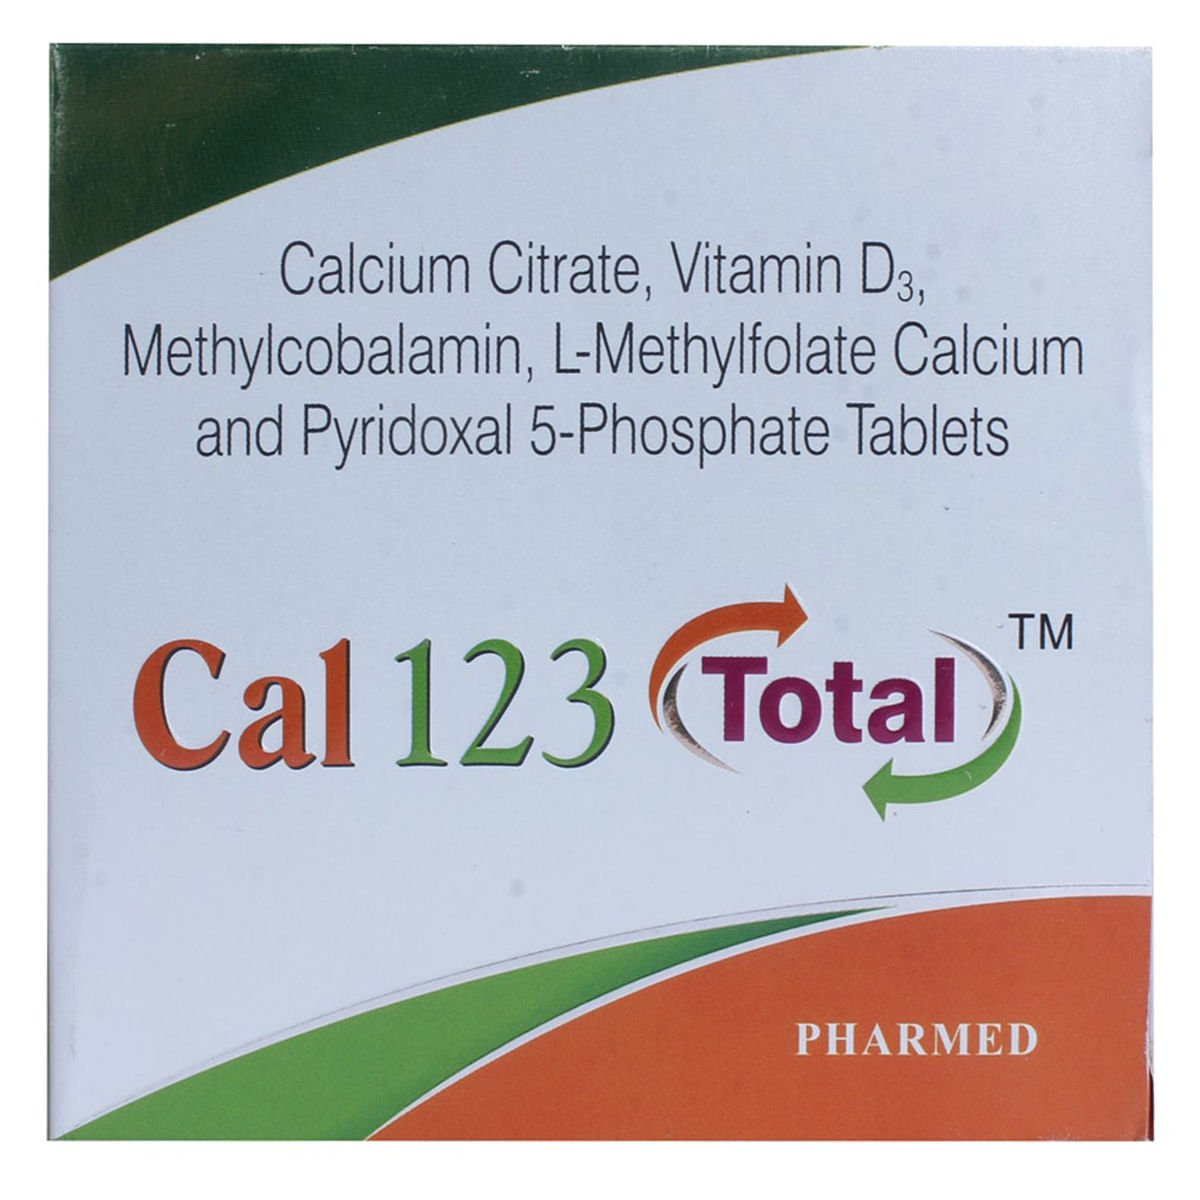 Cal 123 Total Tablet 15's, Pack of 15 TABLETS